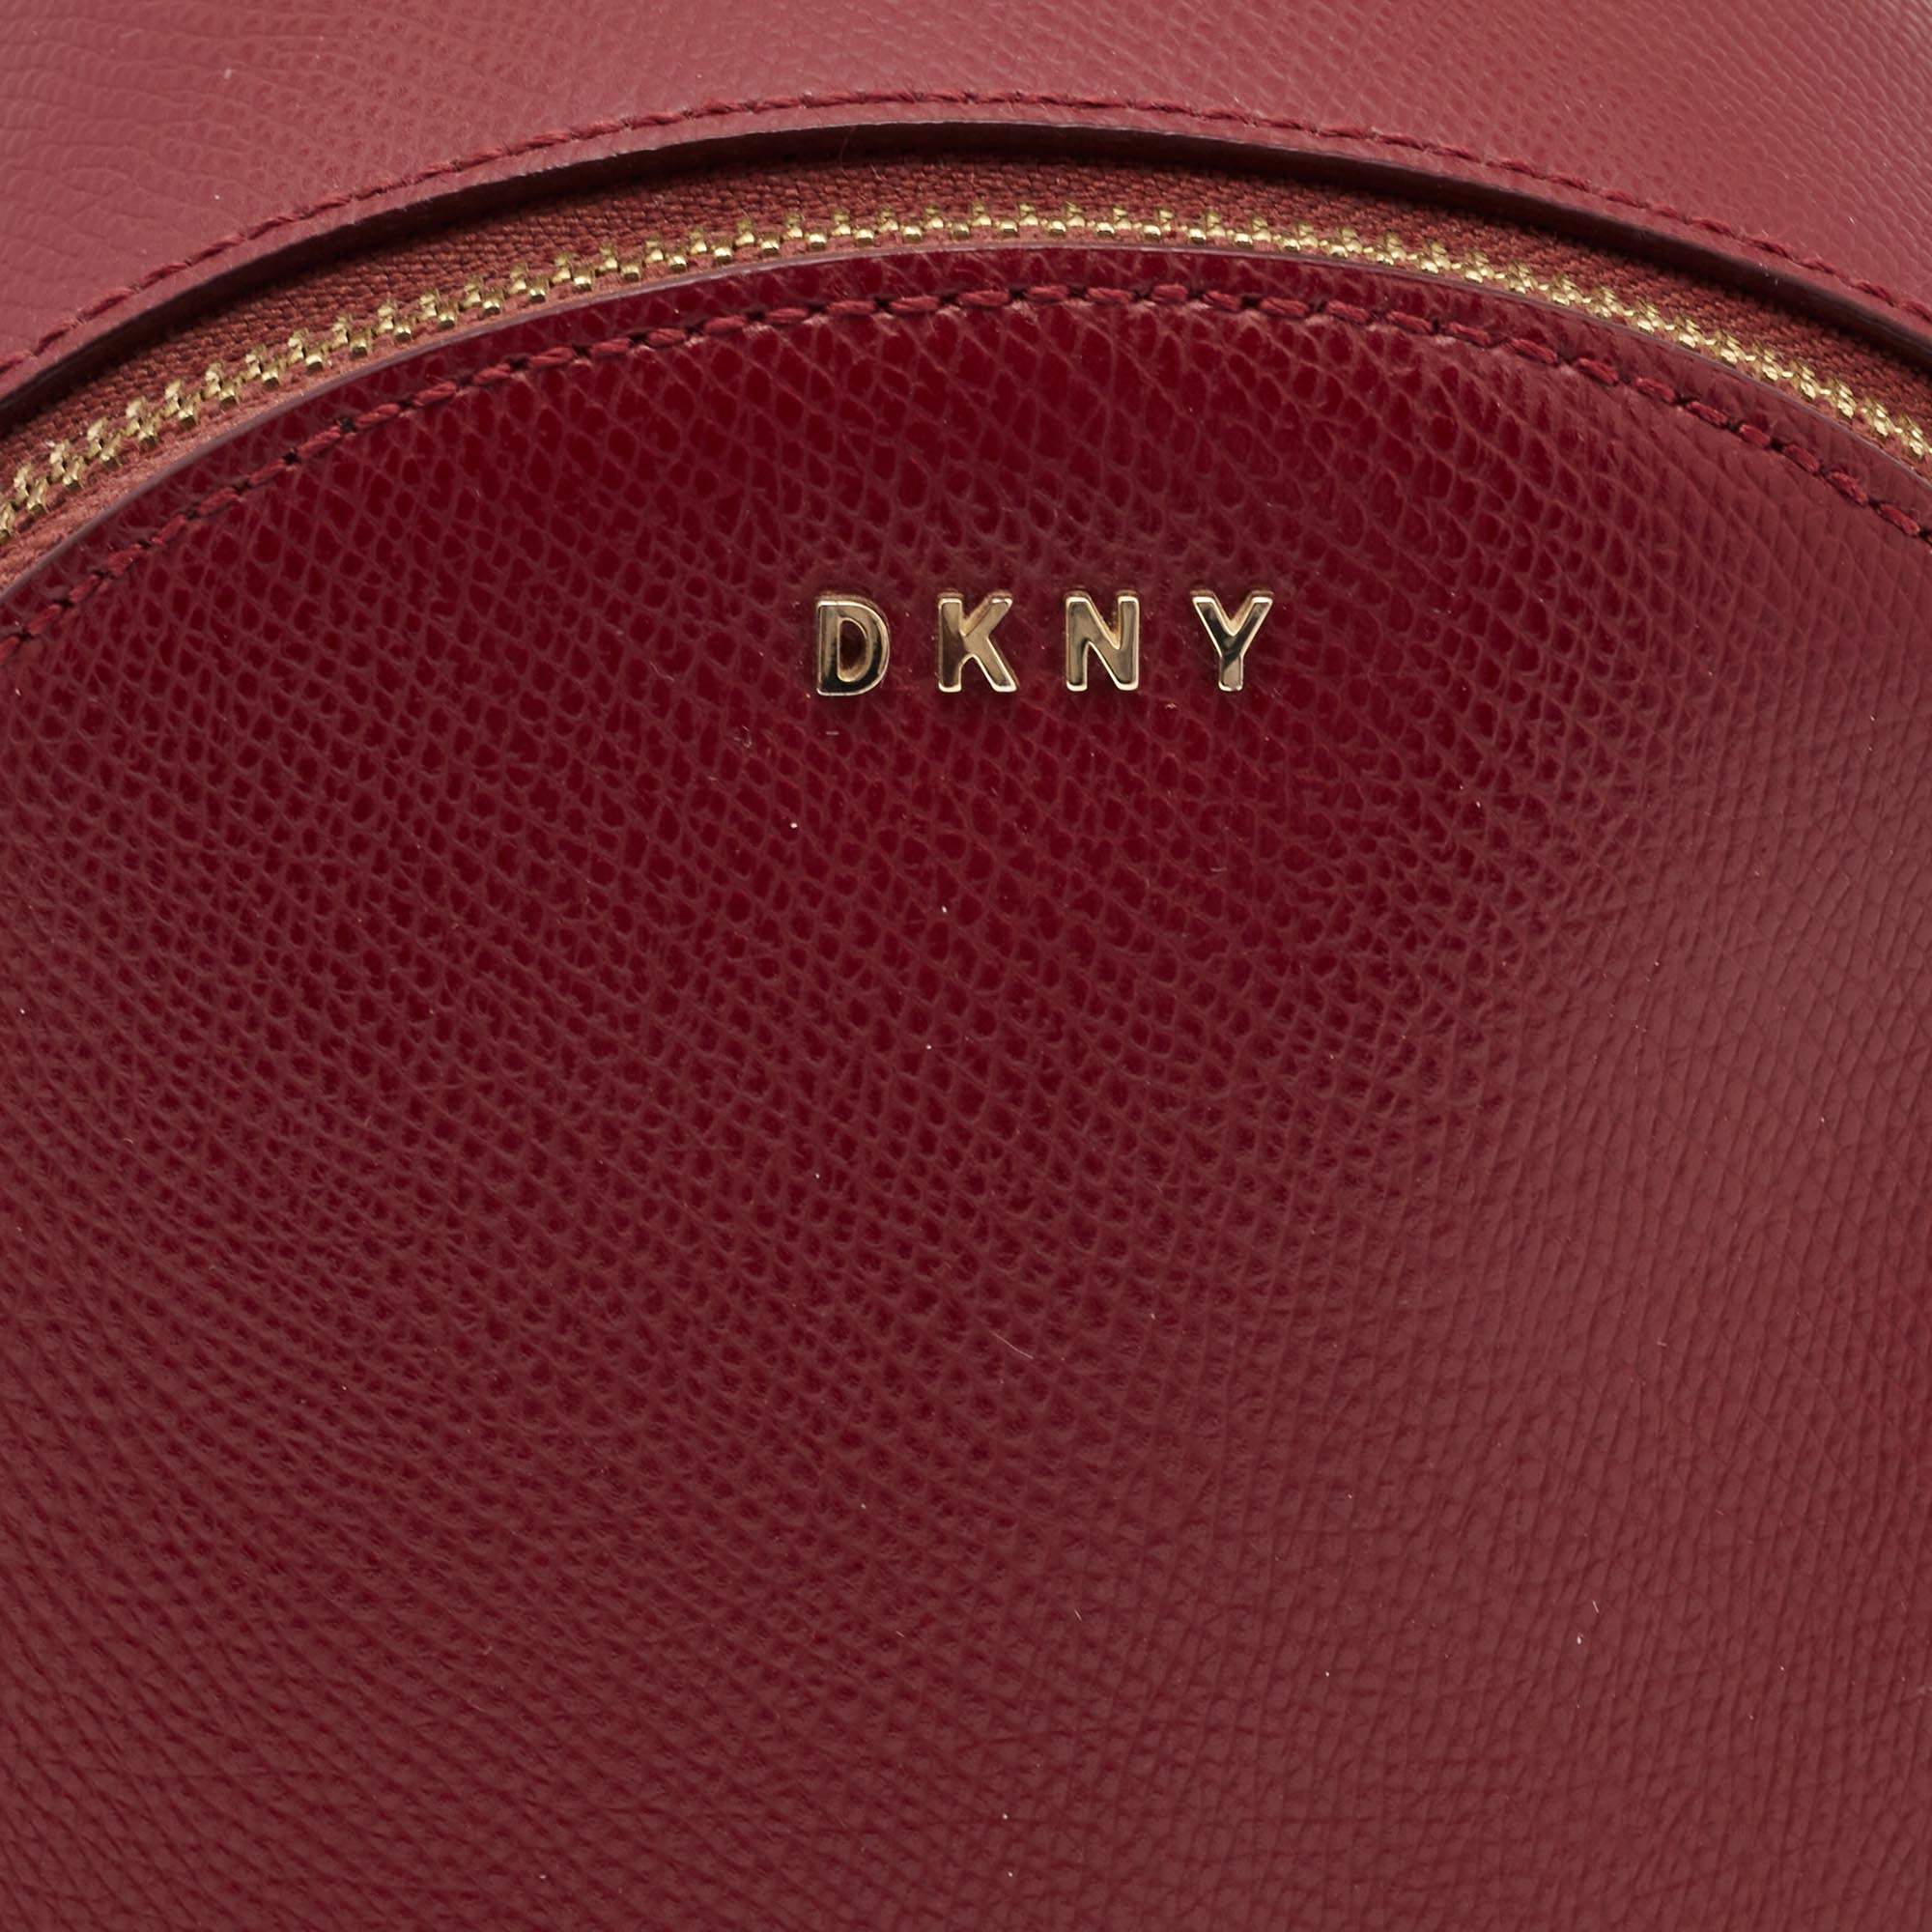 DKNY Red Leather Bryant Double Zip Backpack Dkny